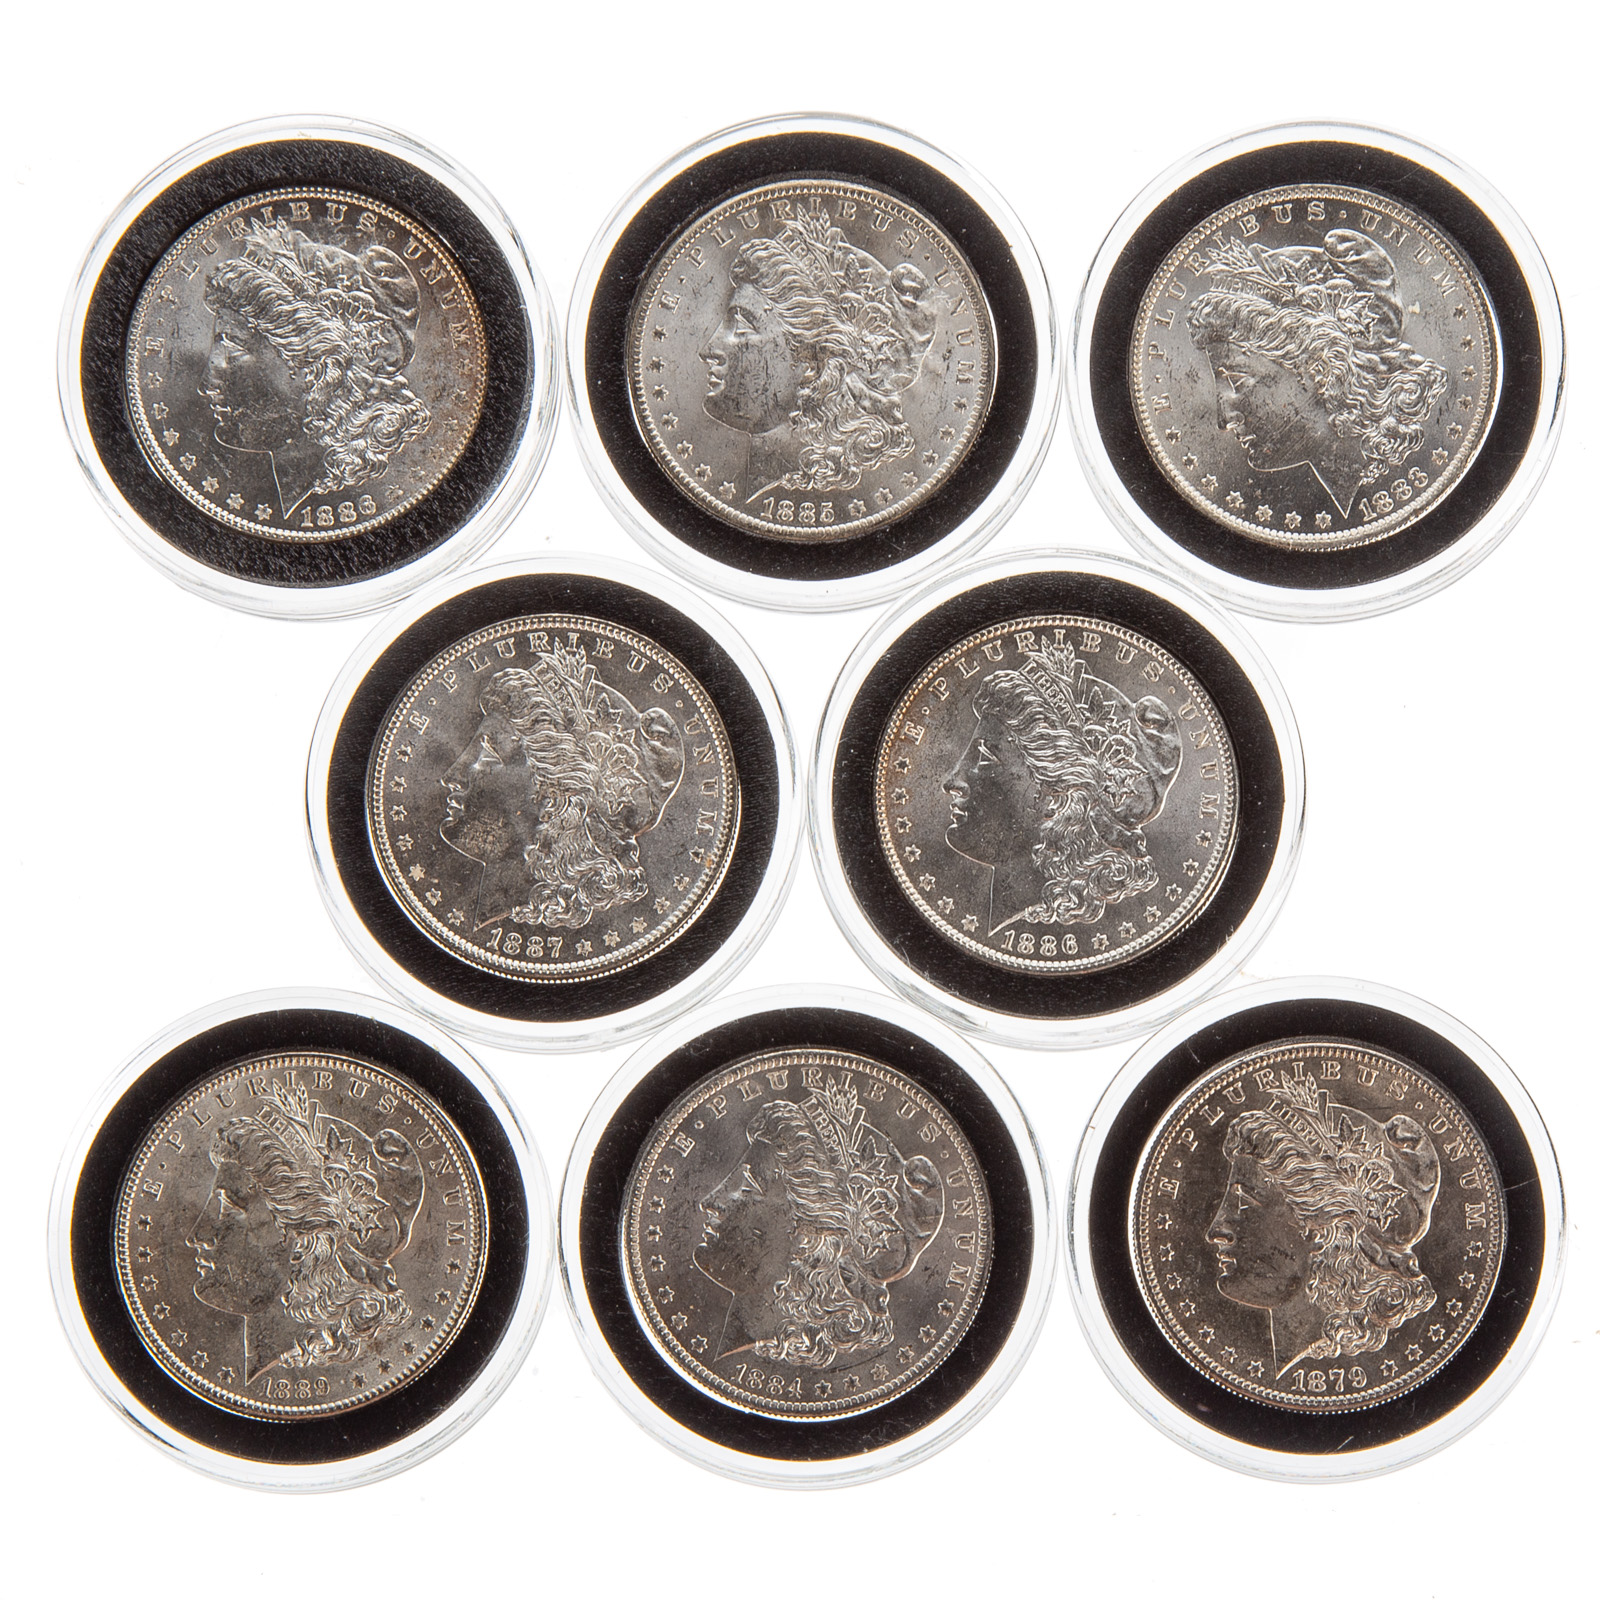 EIGHT DIFFERENT UNCIRCULATED MORGAN 334a53